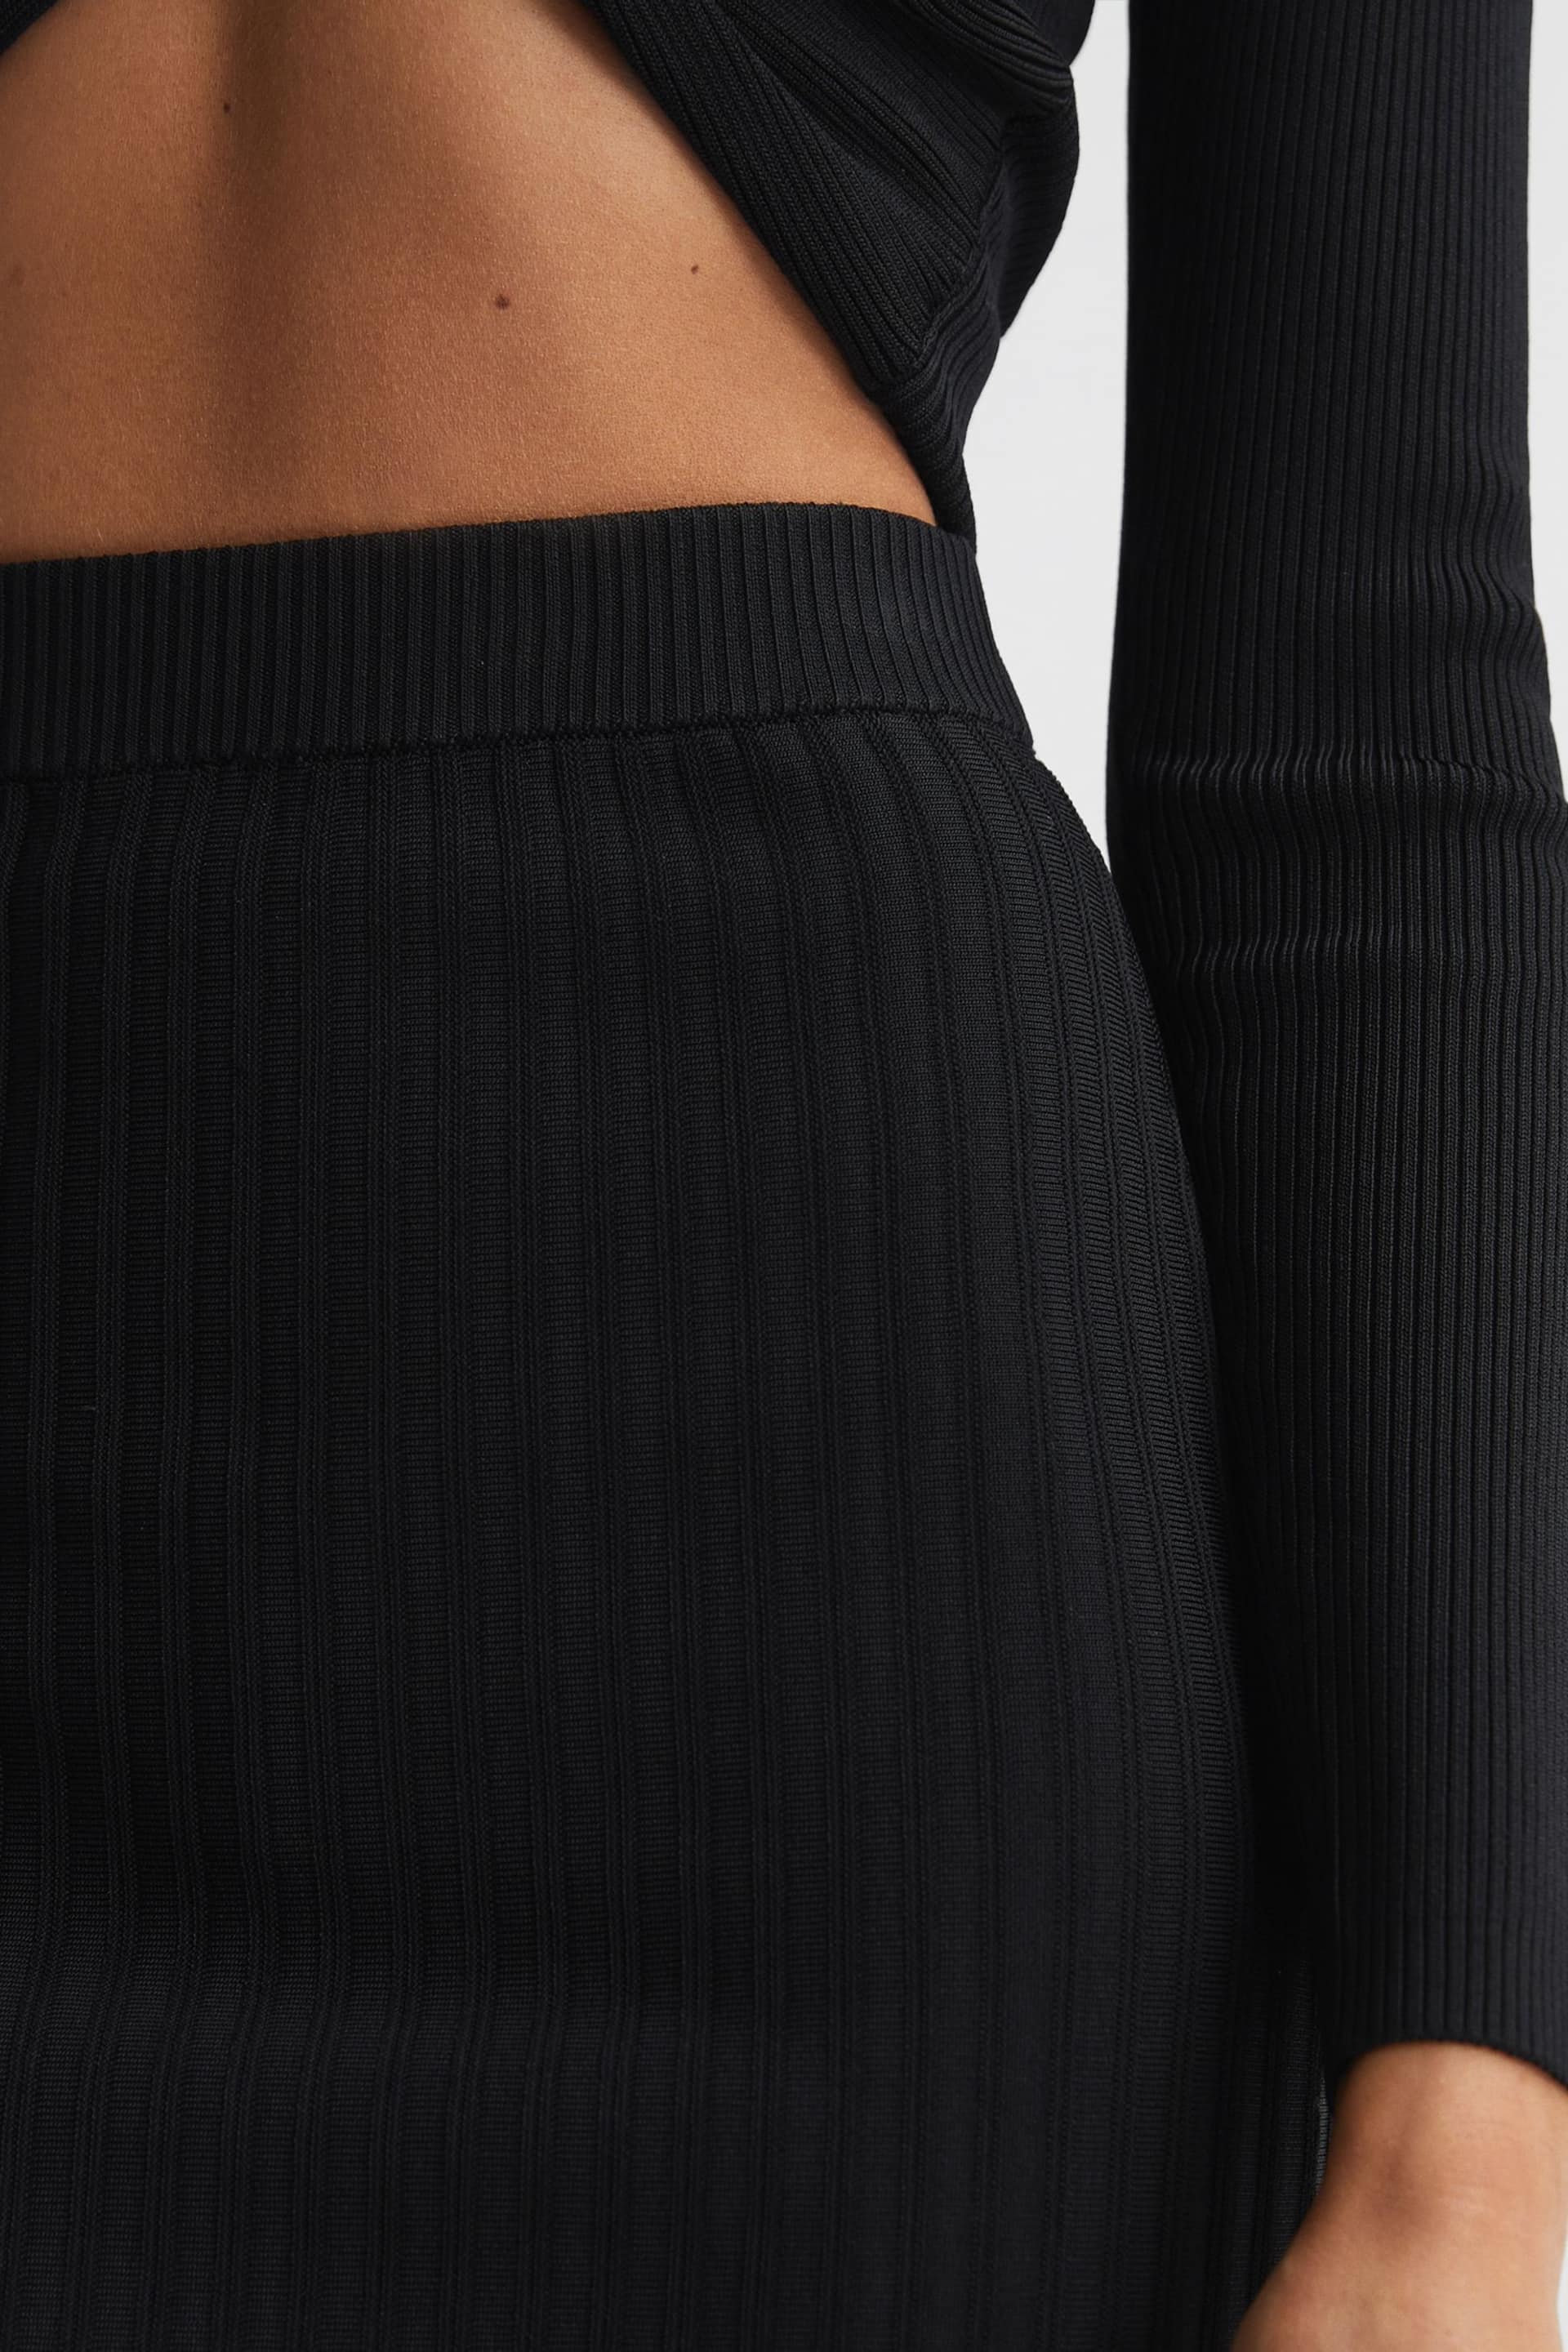 Reiss Black Iona Knitted Pencil Skirt Co-Ord - Image 4 of 5